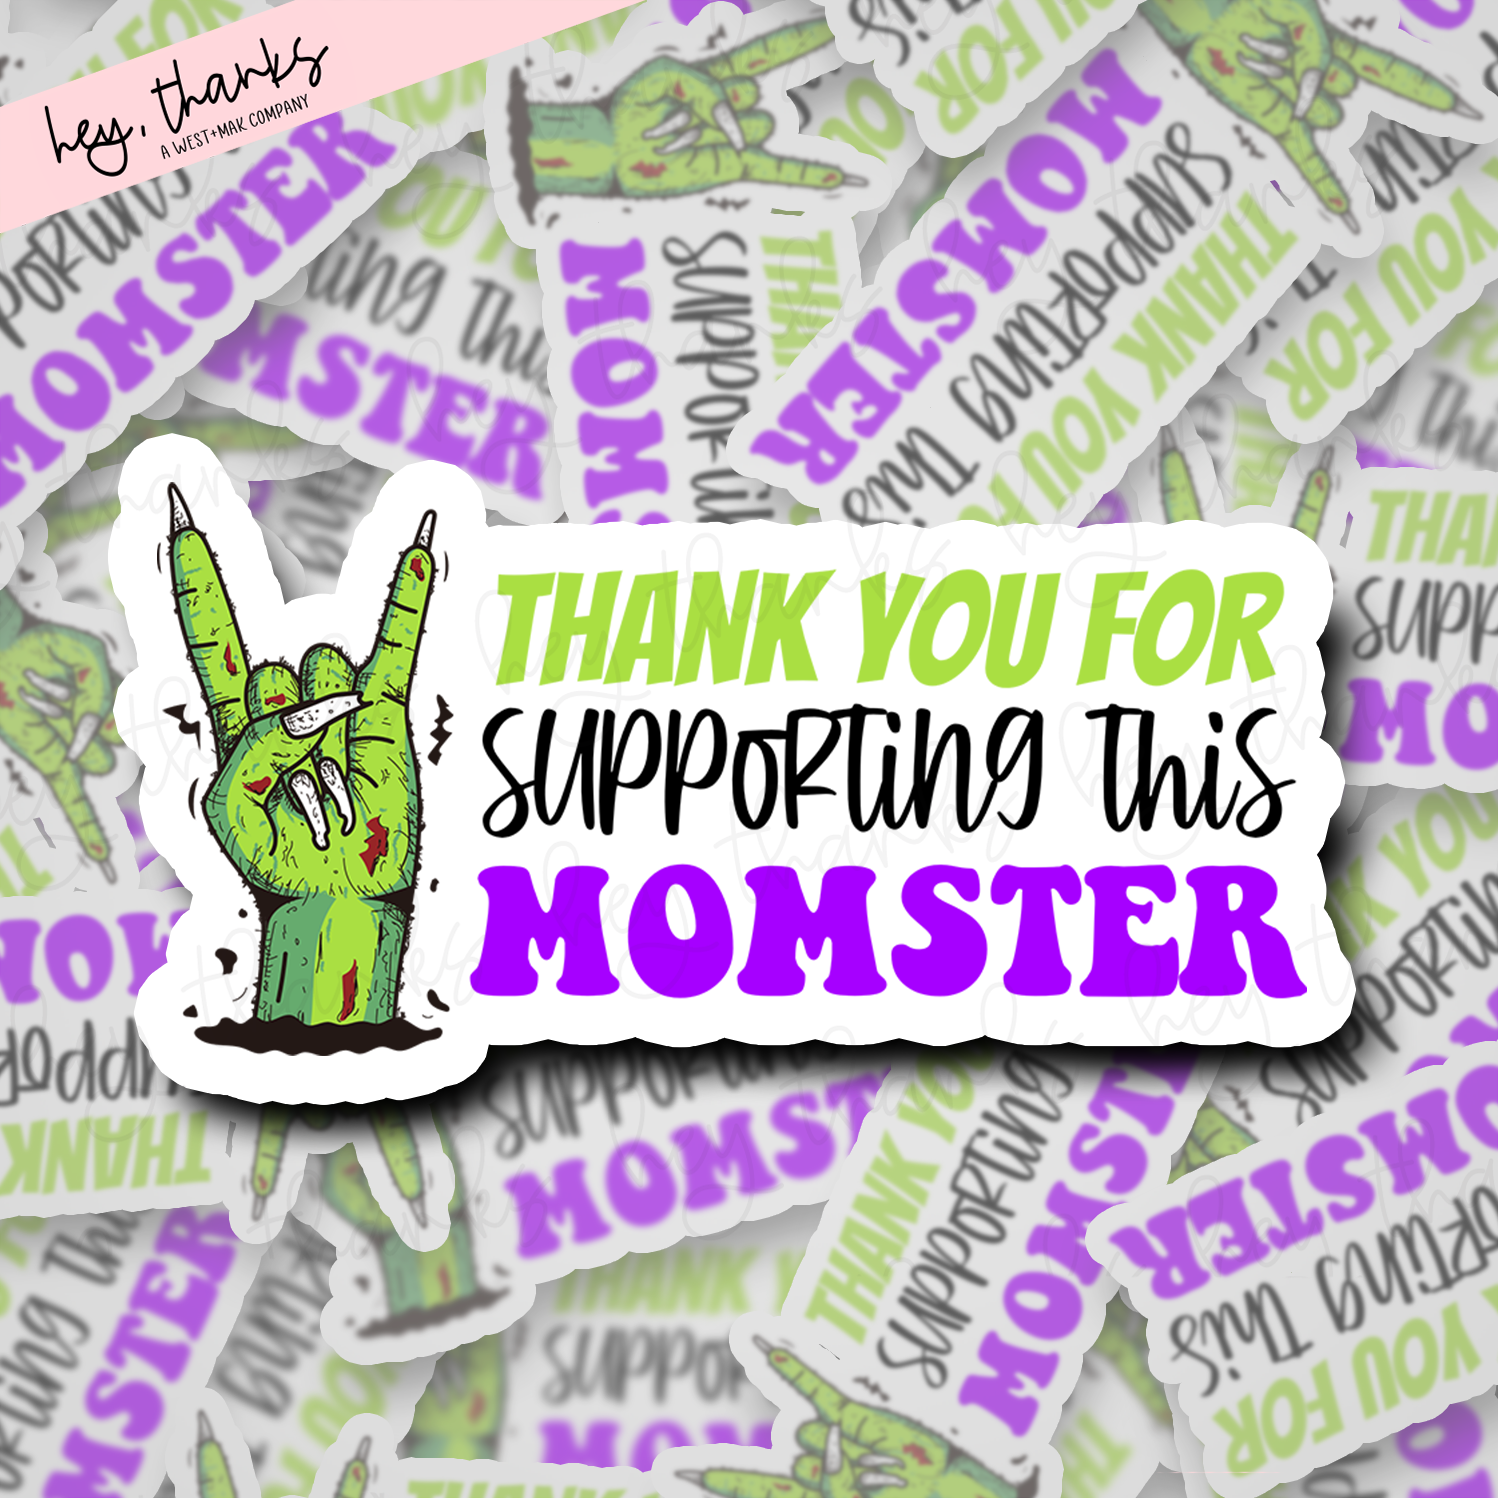 Thank You for Supporting this Momster | Packaging Stickers